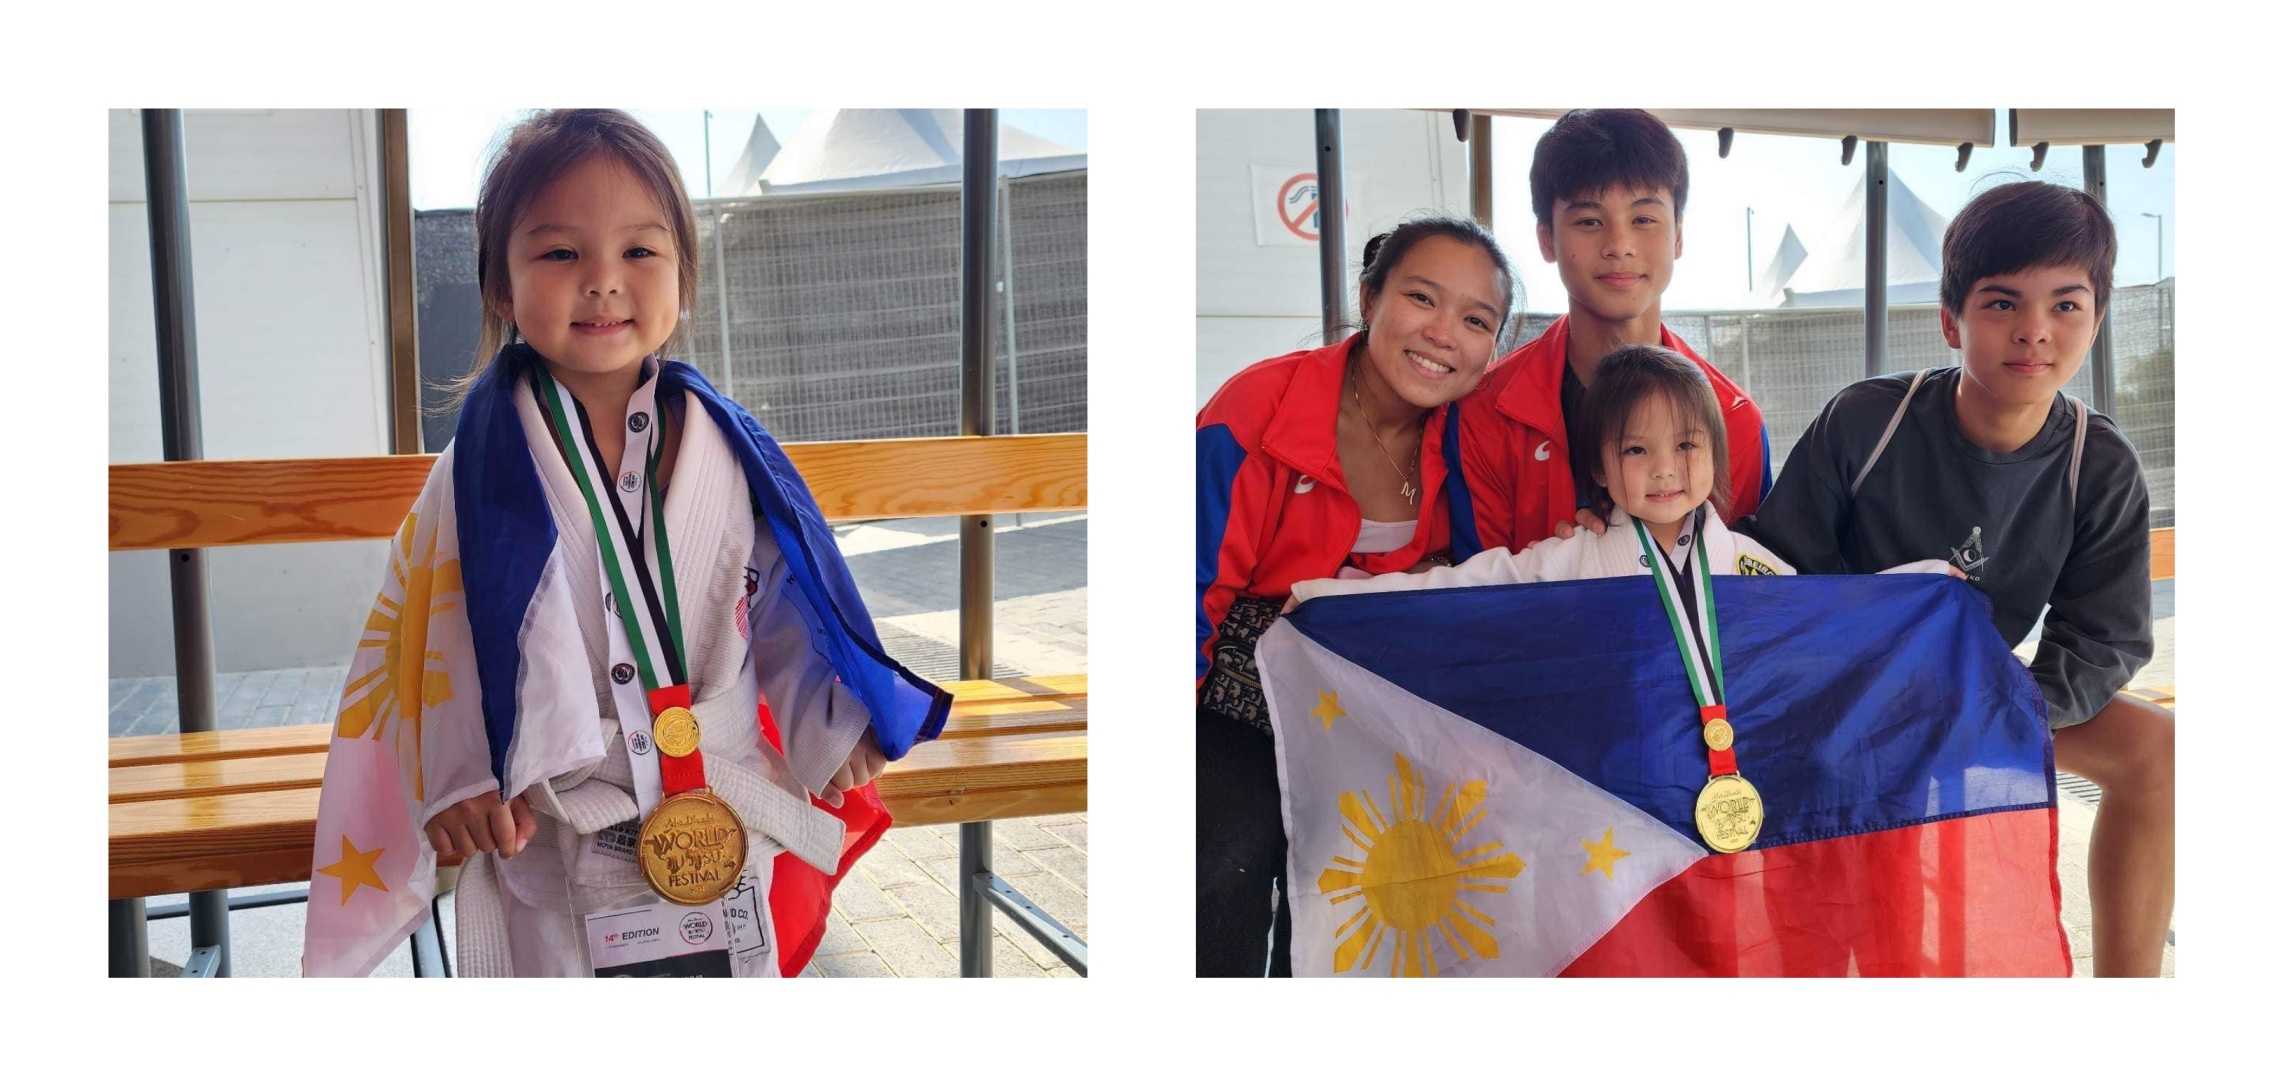 Aleia Aielle Aguilar, 5, is the youngest Pinoy to win world jiu-jitsu championship